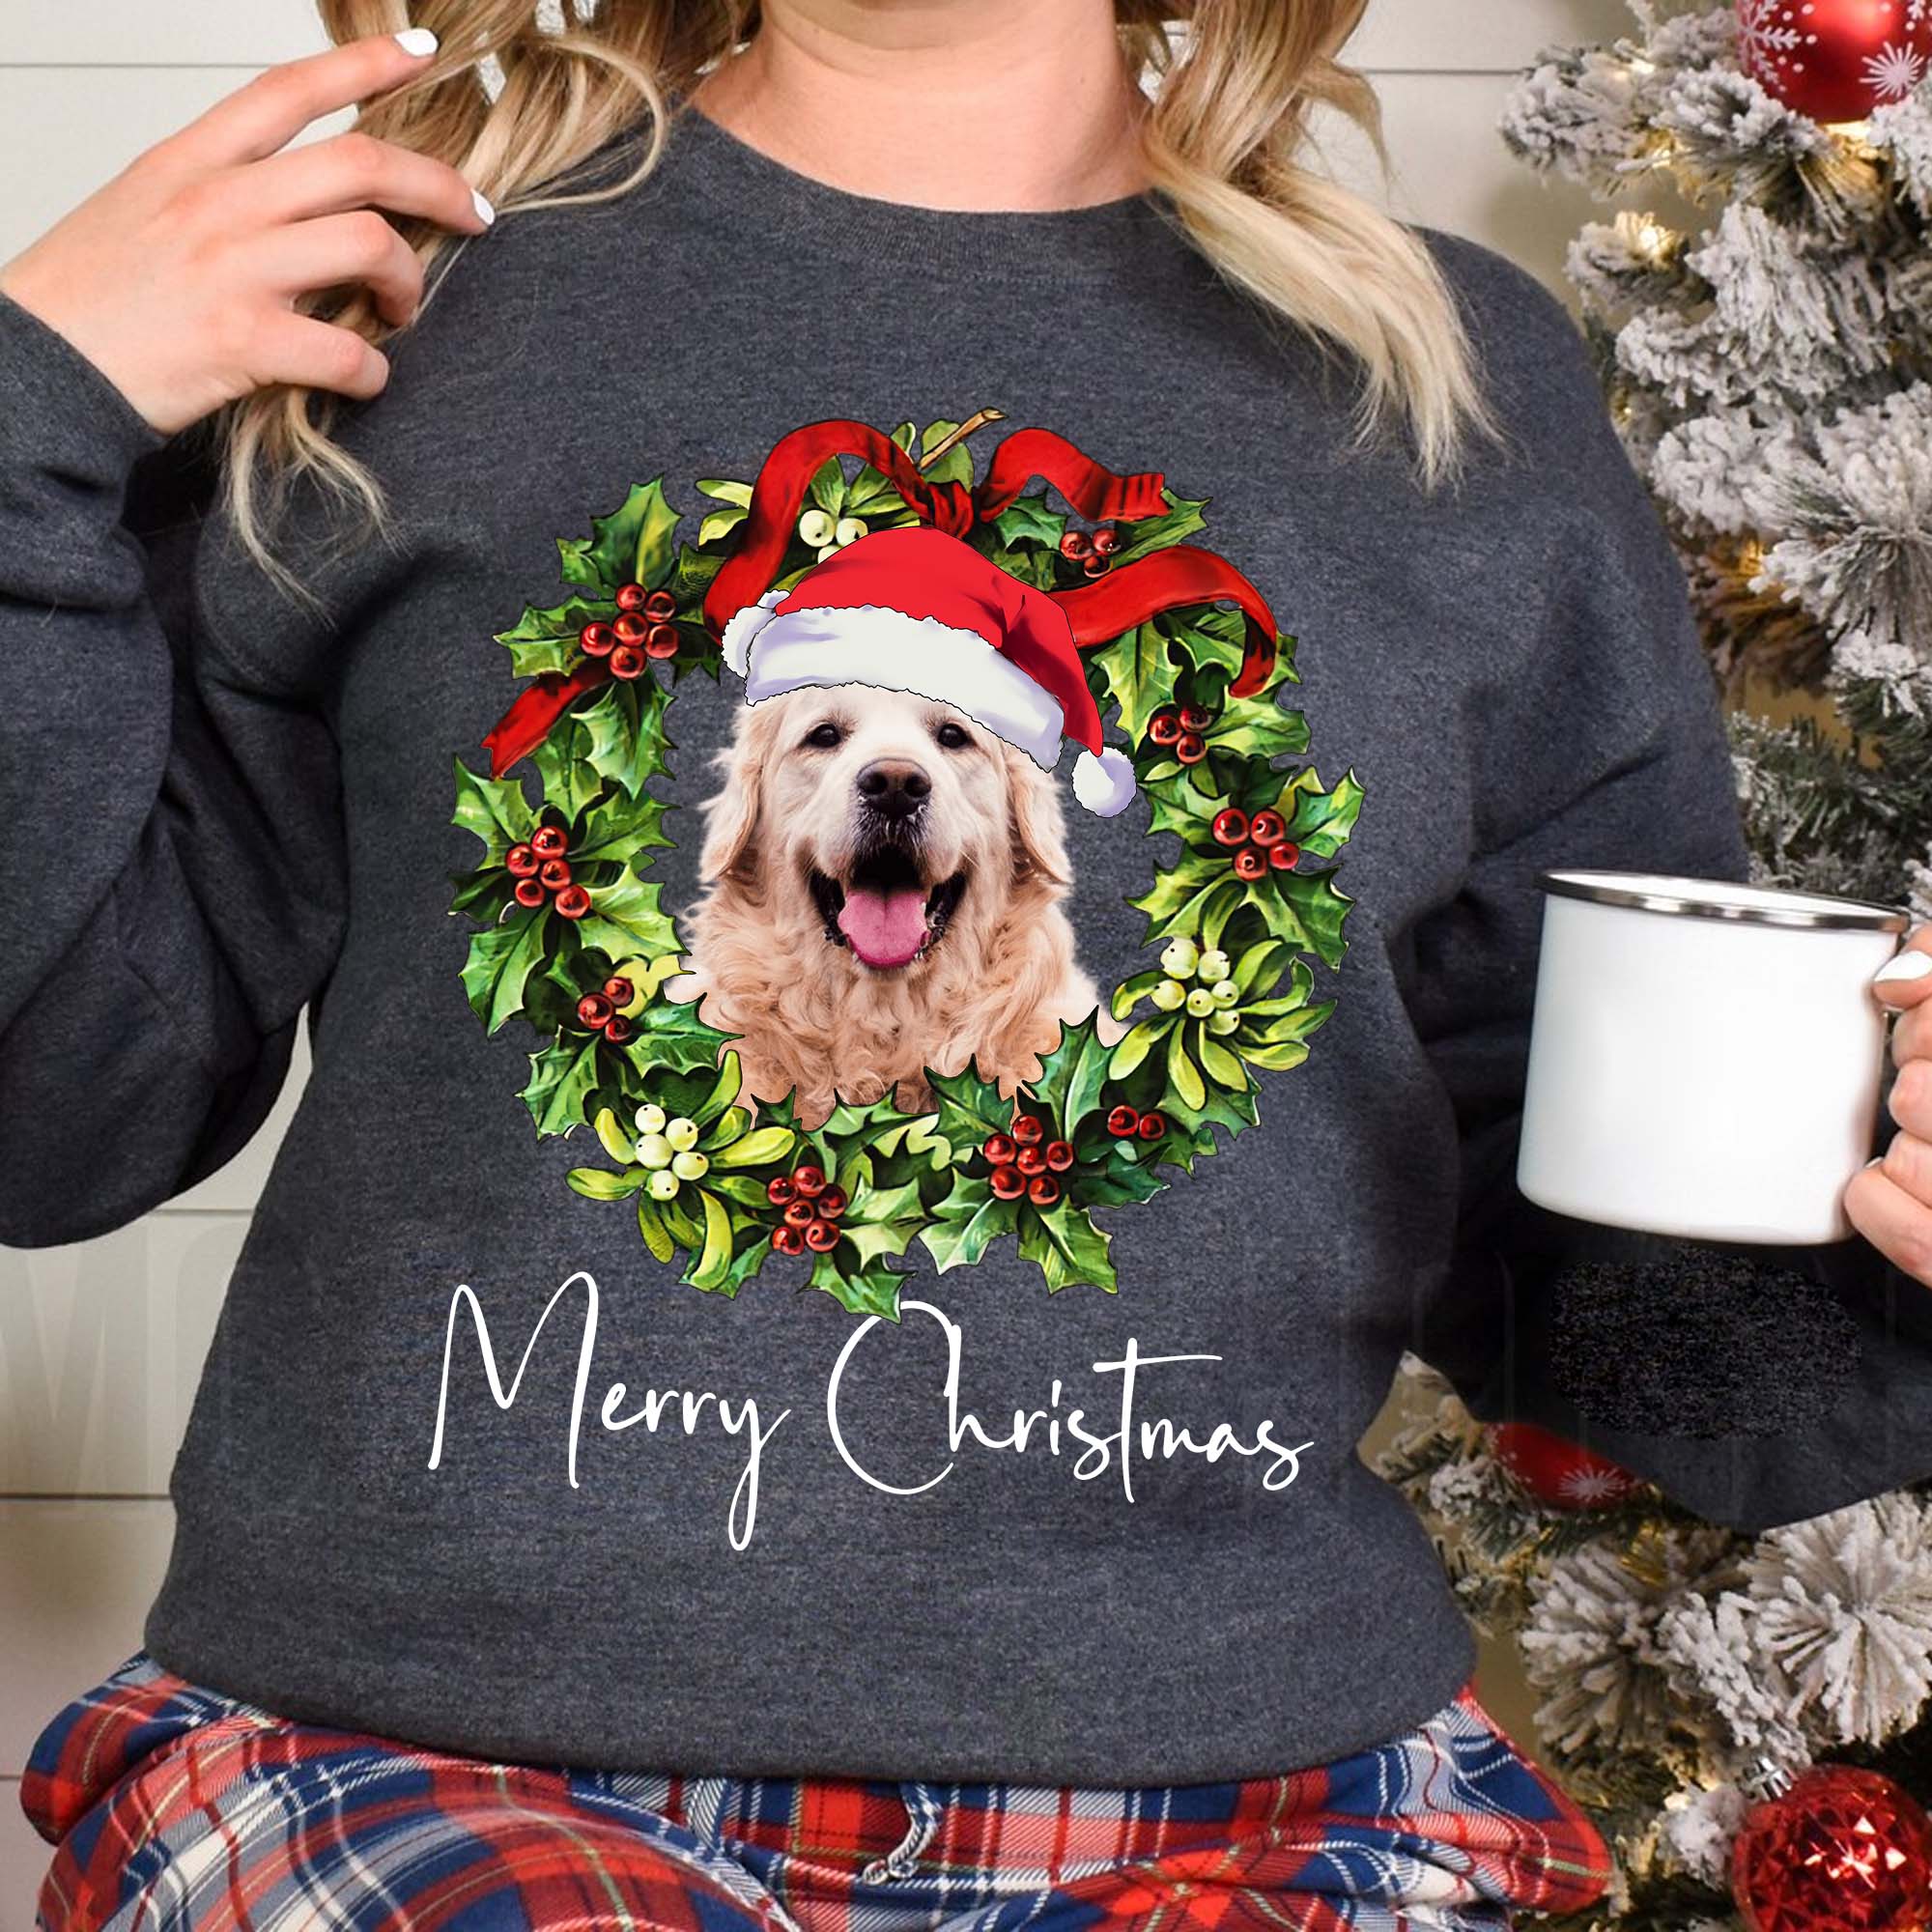 Merry Christmas Photo - Personalized Sweatshirt - Family Gift, Gift For Pet Lover, Xmas Gift